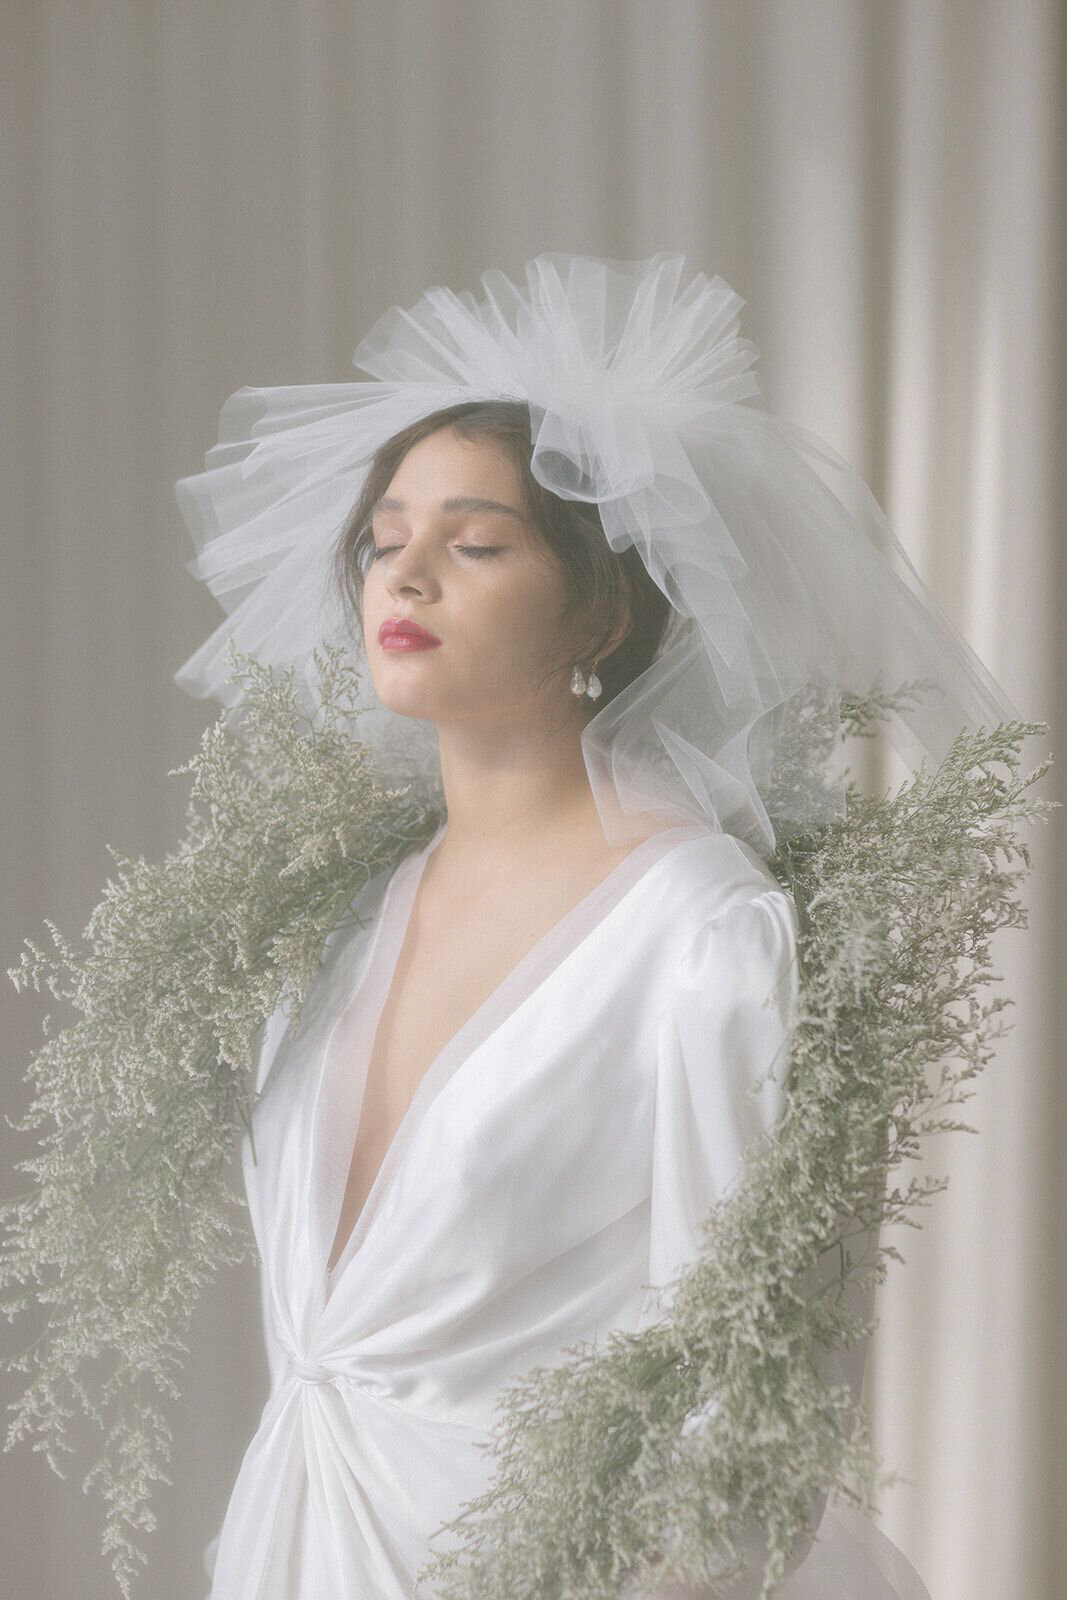 Mini blusher veil by Blair Nadeau Bridal Adornments, romantic and modern wedding jewelry based in Brampton. Featured on the Brontë Bride Vendor Guide.